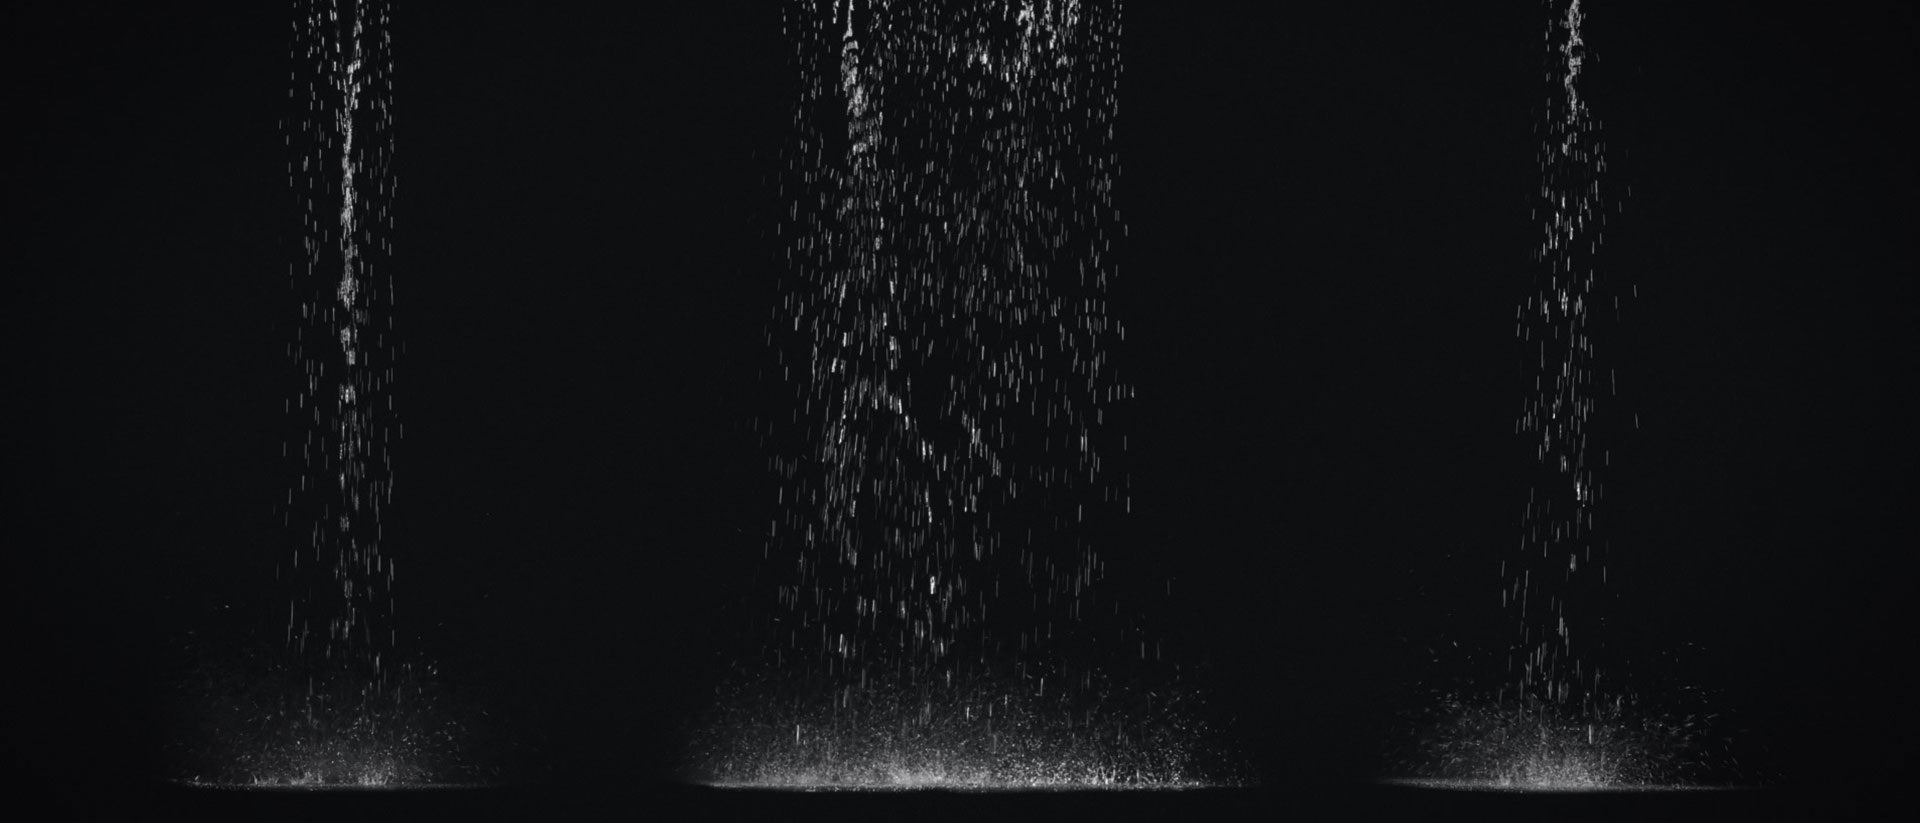 New Pre-Keyed Dripping Water VFX Stock Footage Now Available